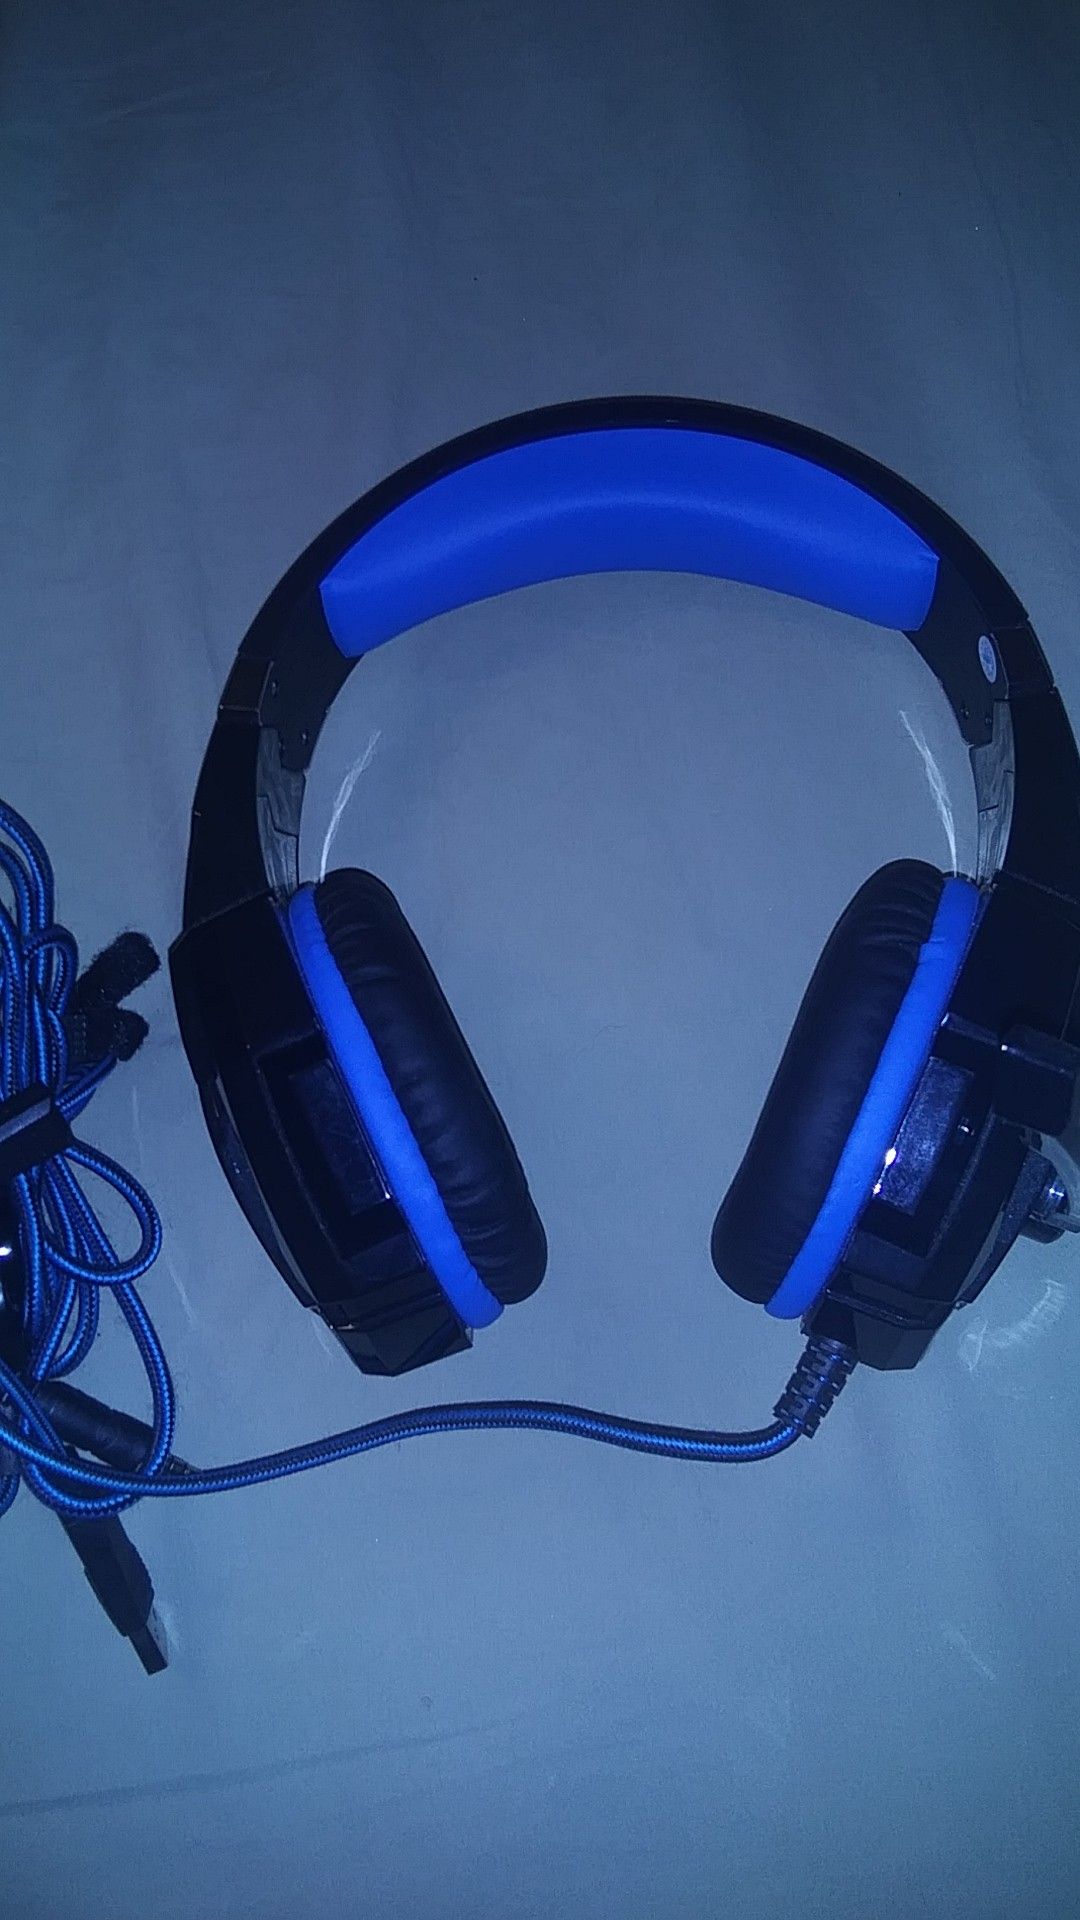 Afterglow Xbox ONE headset!